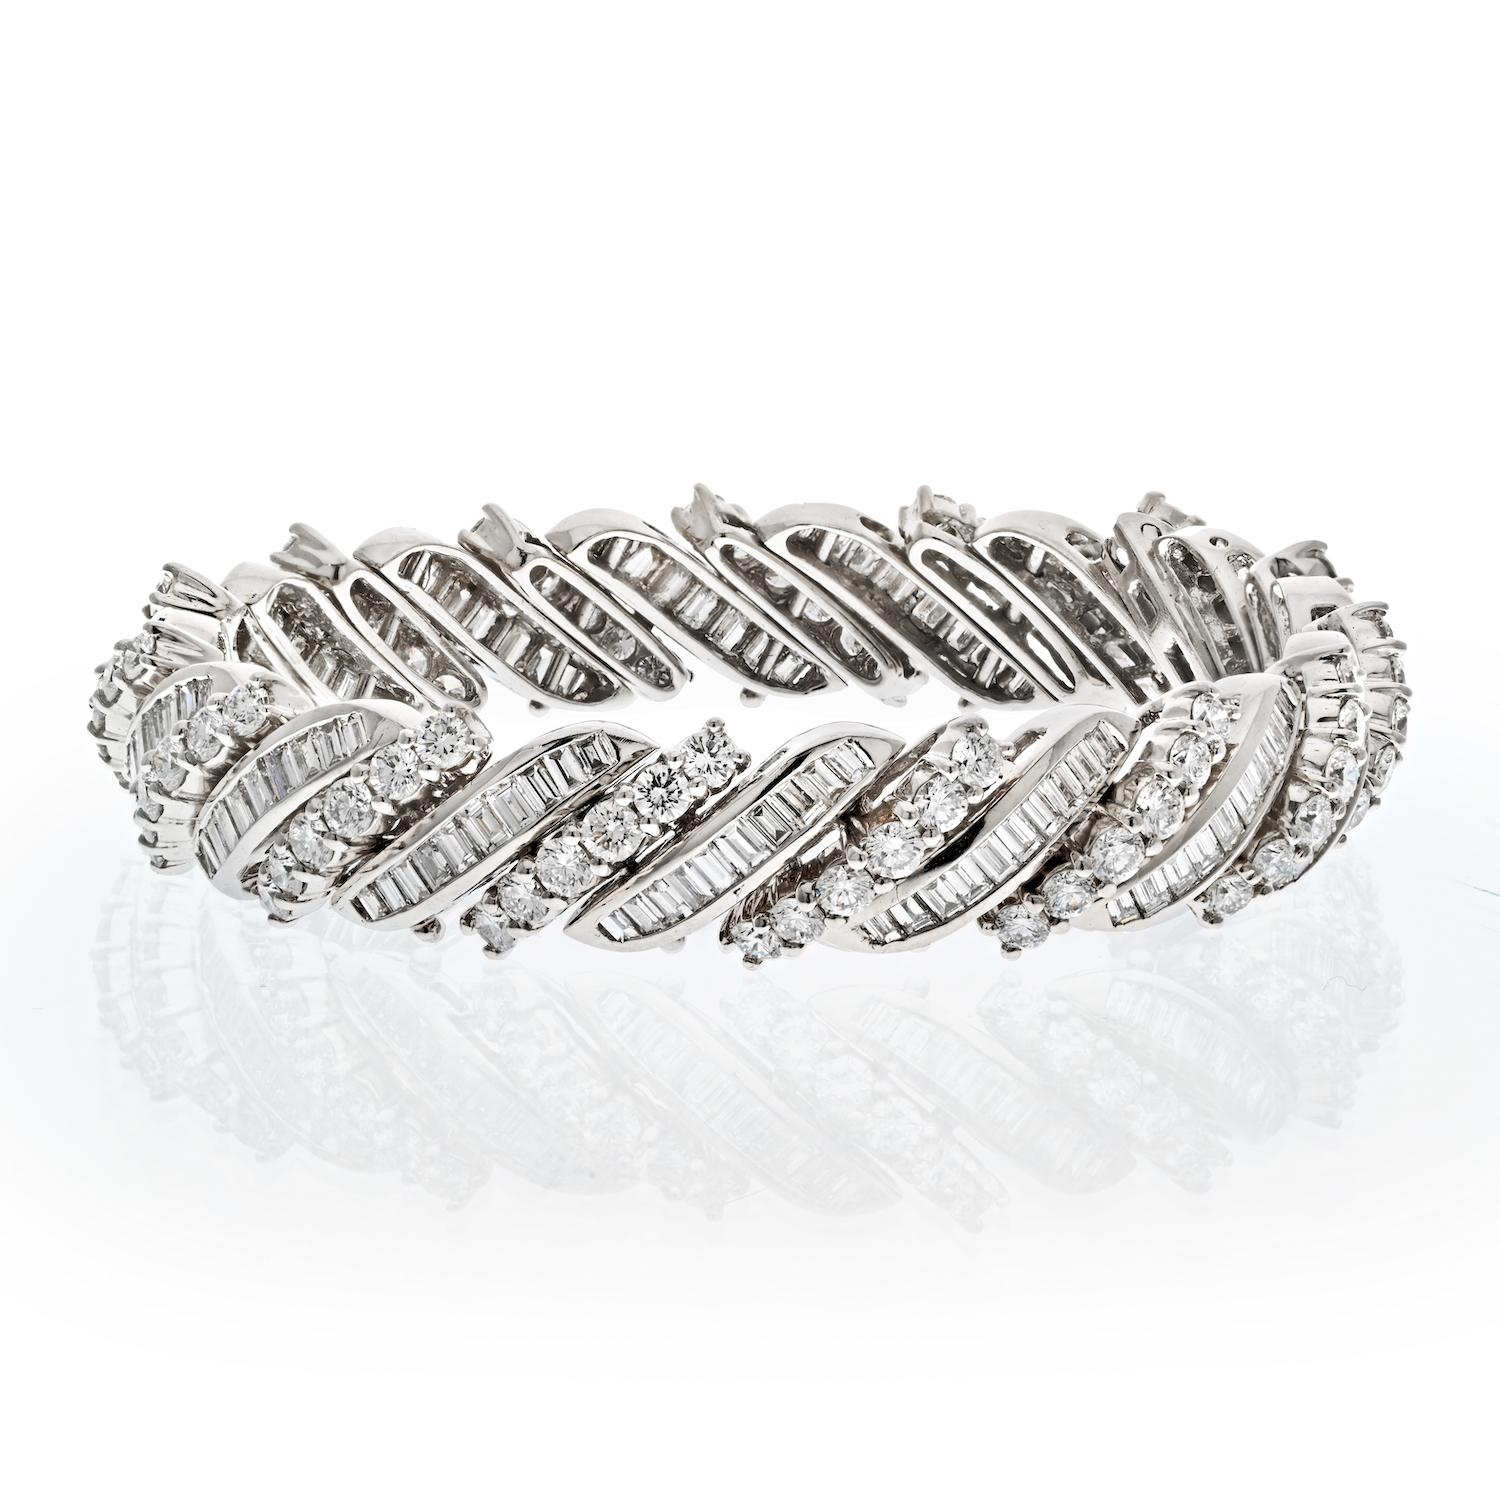 This platinum midcentury round and baguette cut diamond bracelet is a truly unique and exquisite piece of jewelry. The combination of round and baguette cut diamonds creates a mesmerizing sparkle and shine that is truly remarkable. This bracelet is